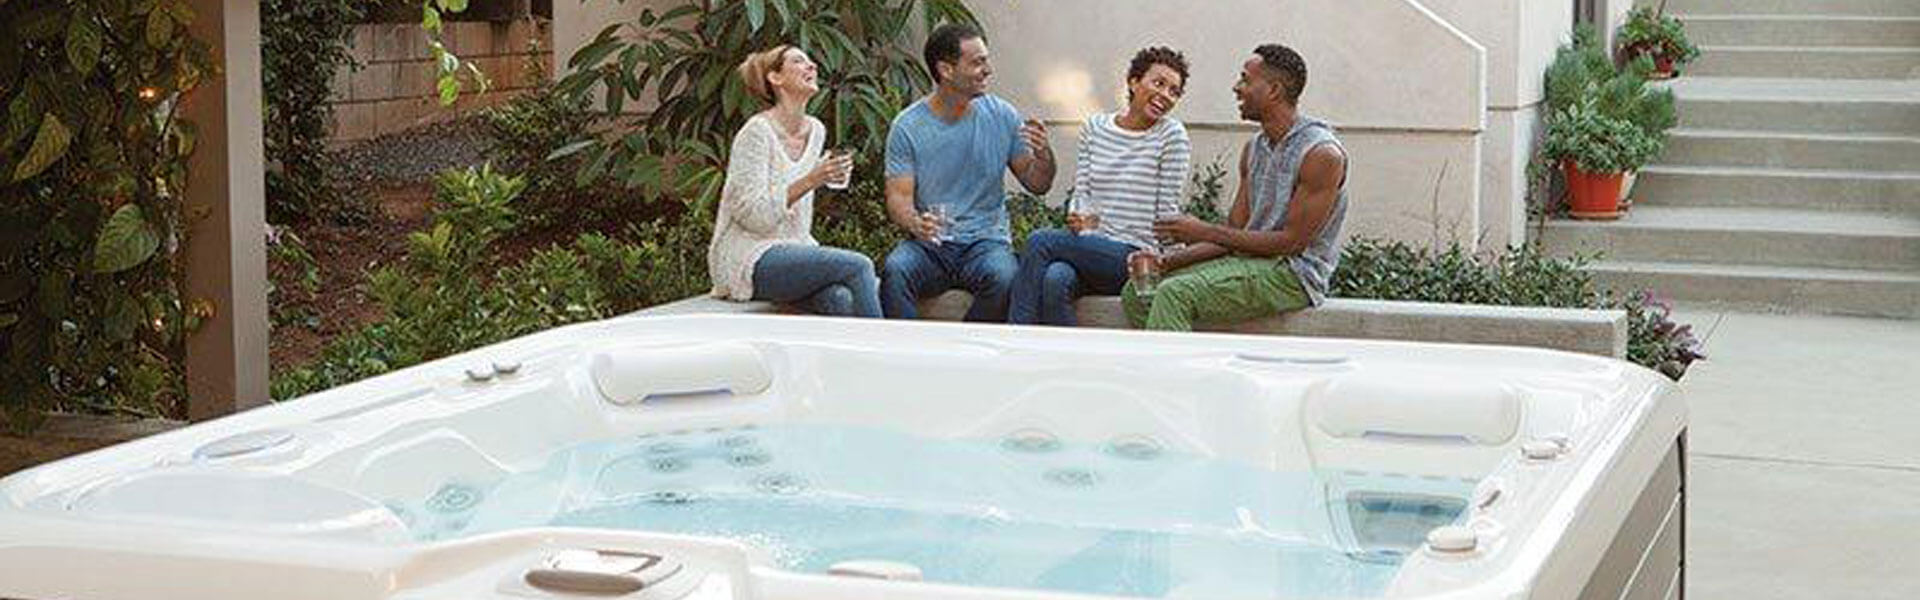 Salt Water Sanitation Systems: The Pros and Cons of Salt Water Hot Tubs